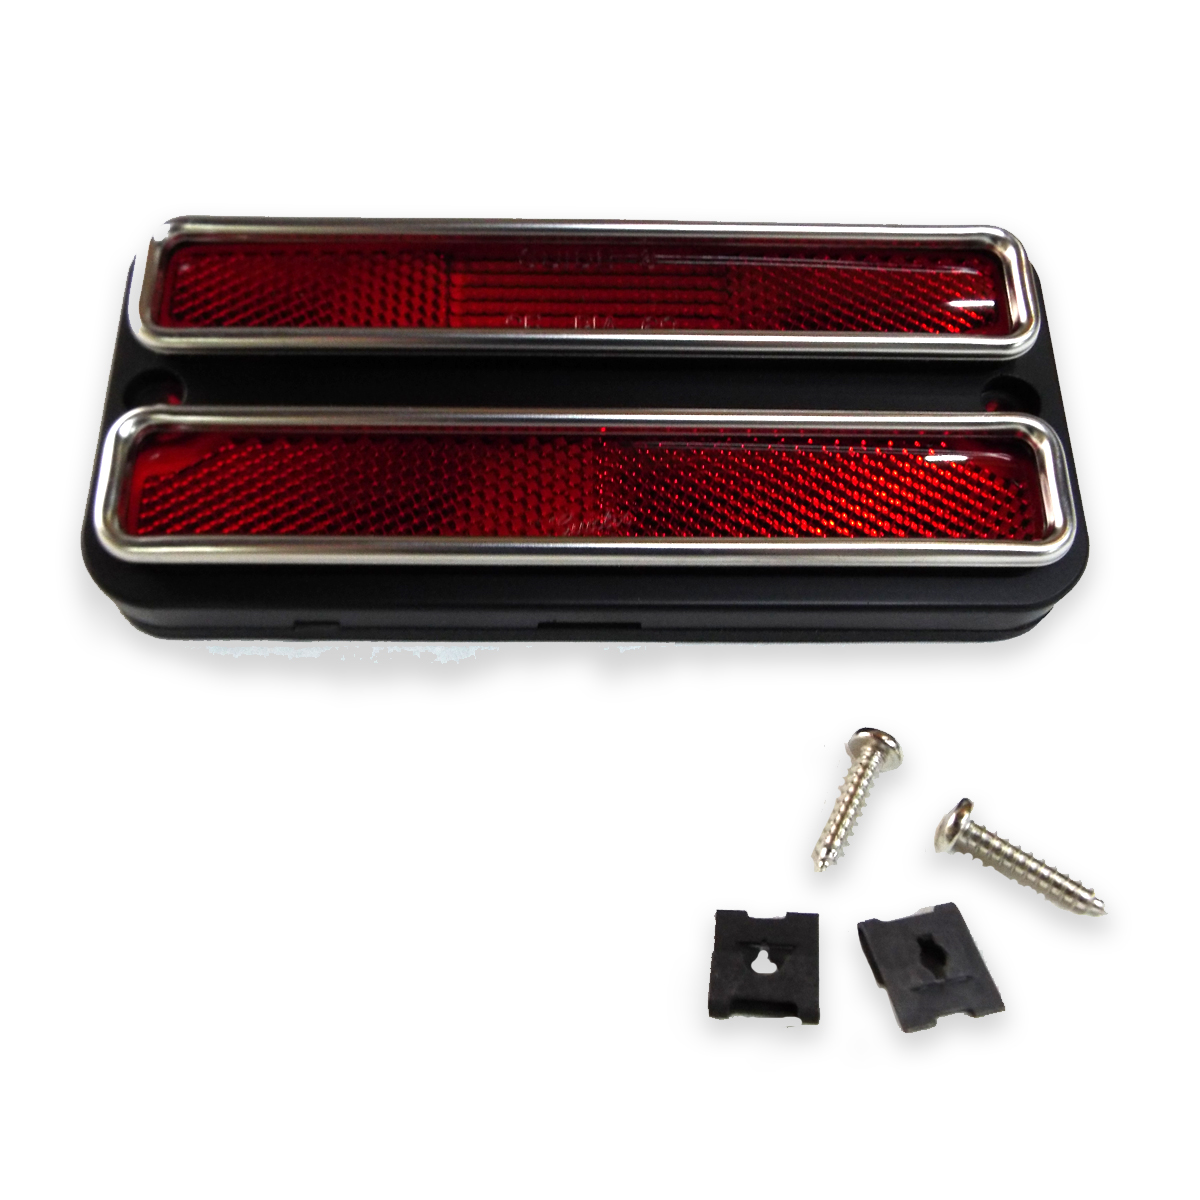 1969-1972 Rear Red Side Marker Light Assembly Double Ring Style Chevrolet and GMC Pickup Truck